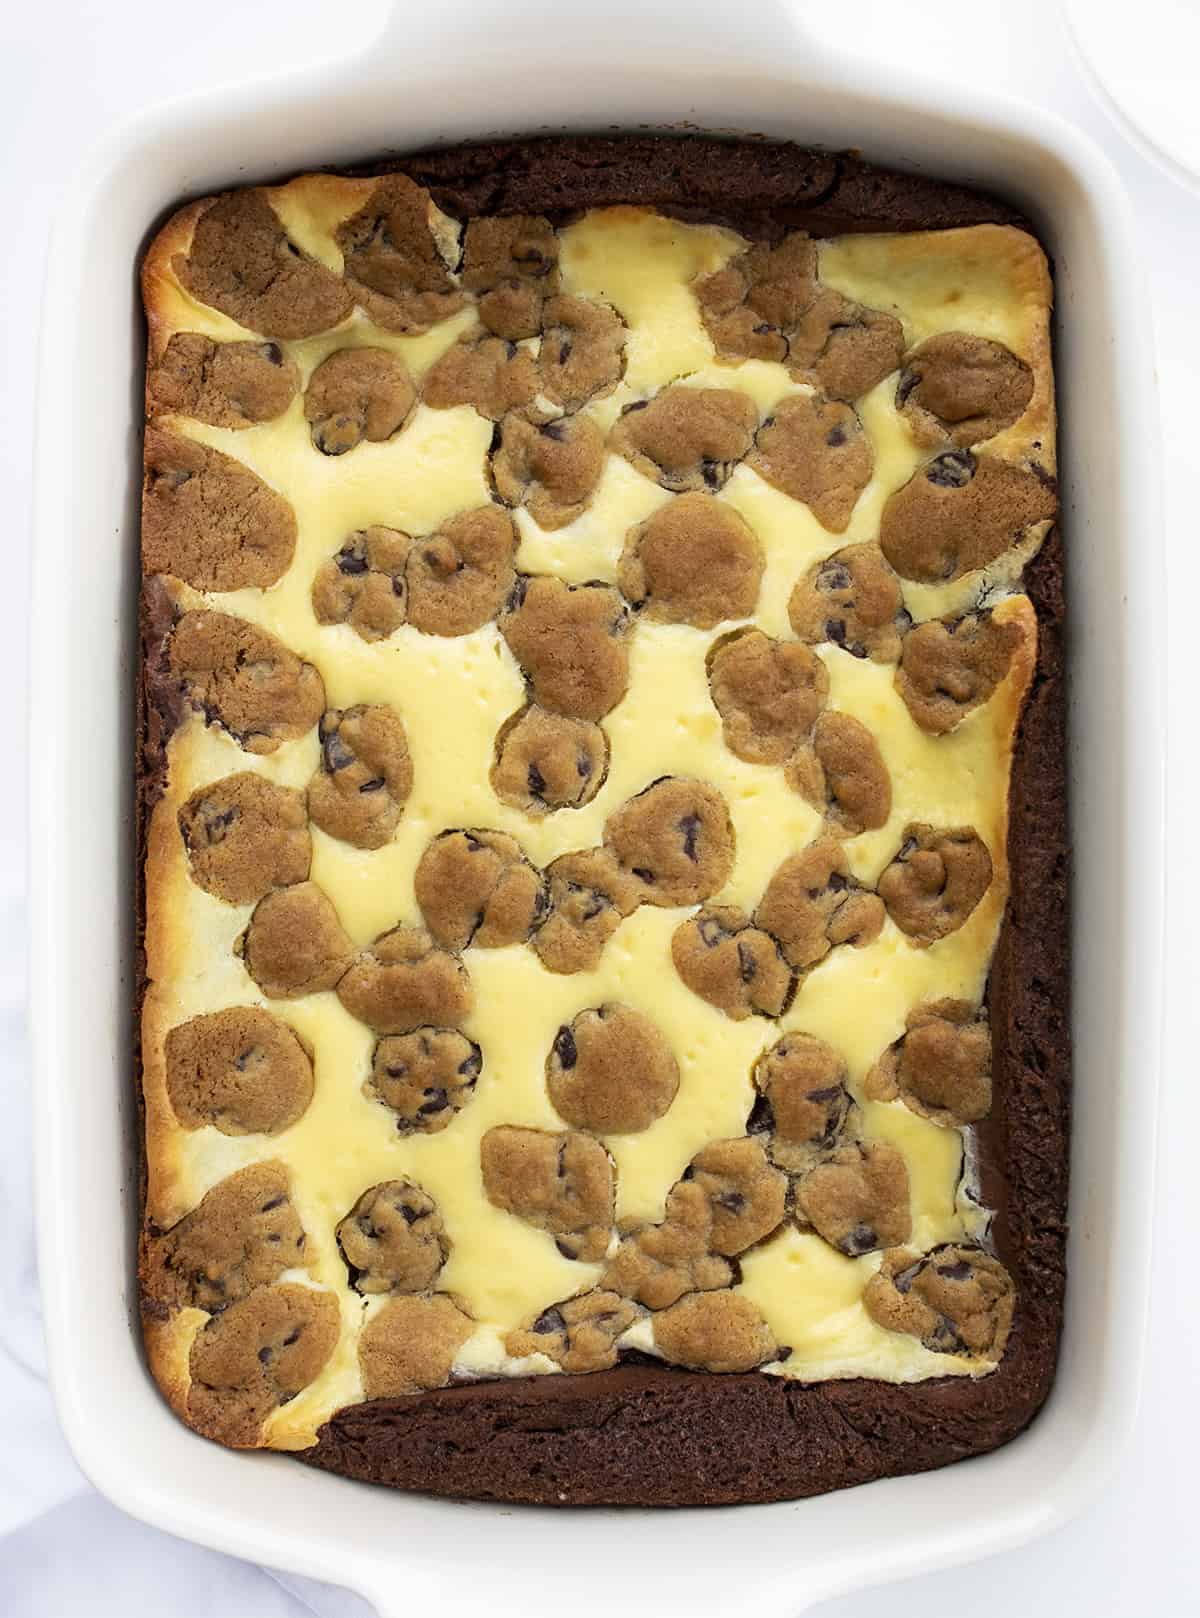 Chocolate Chip Cookie Cheesecake Brownies in a White Dish from Overhead